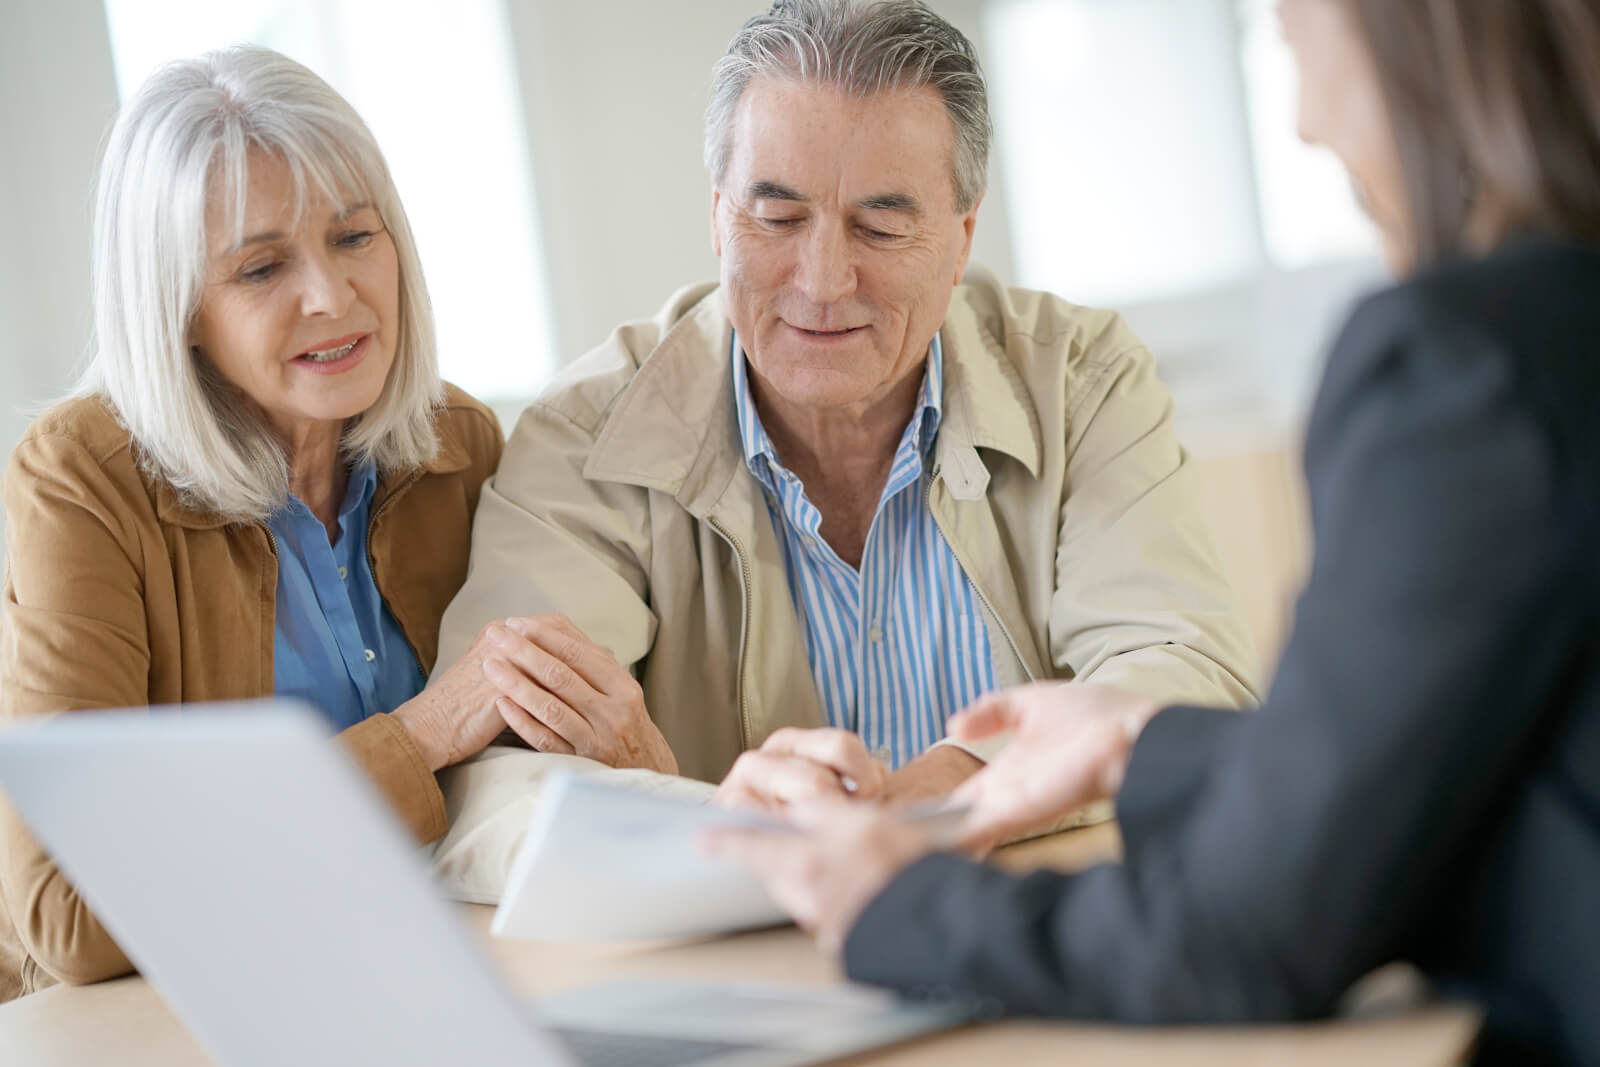 Are Reverse Mortgages a Wise Financial Move?